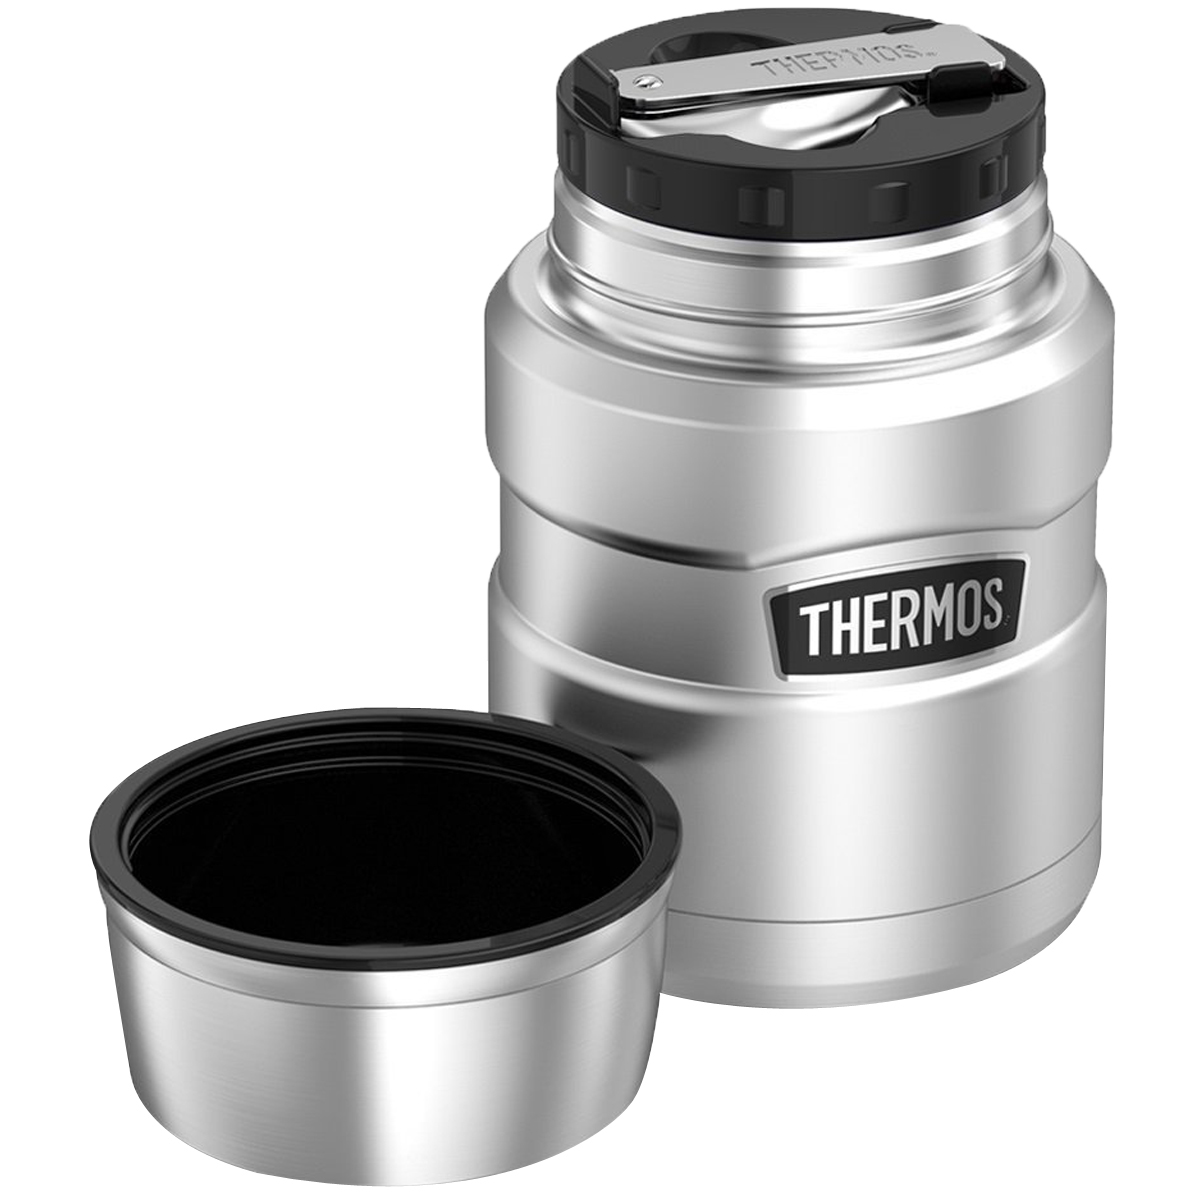 Thermos Stainless King 16 Ounce Food Jar with Folding Spoon, Matte Stainless - image 5 of 5